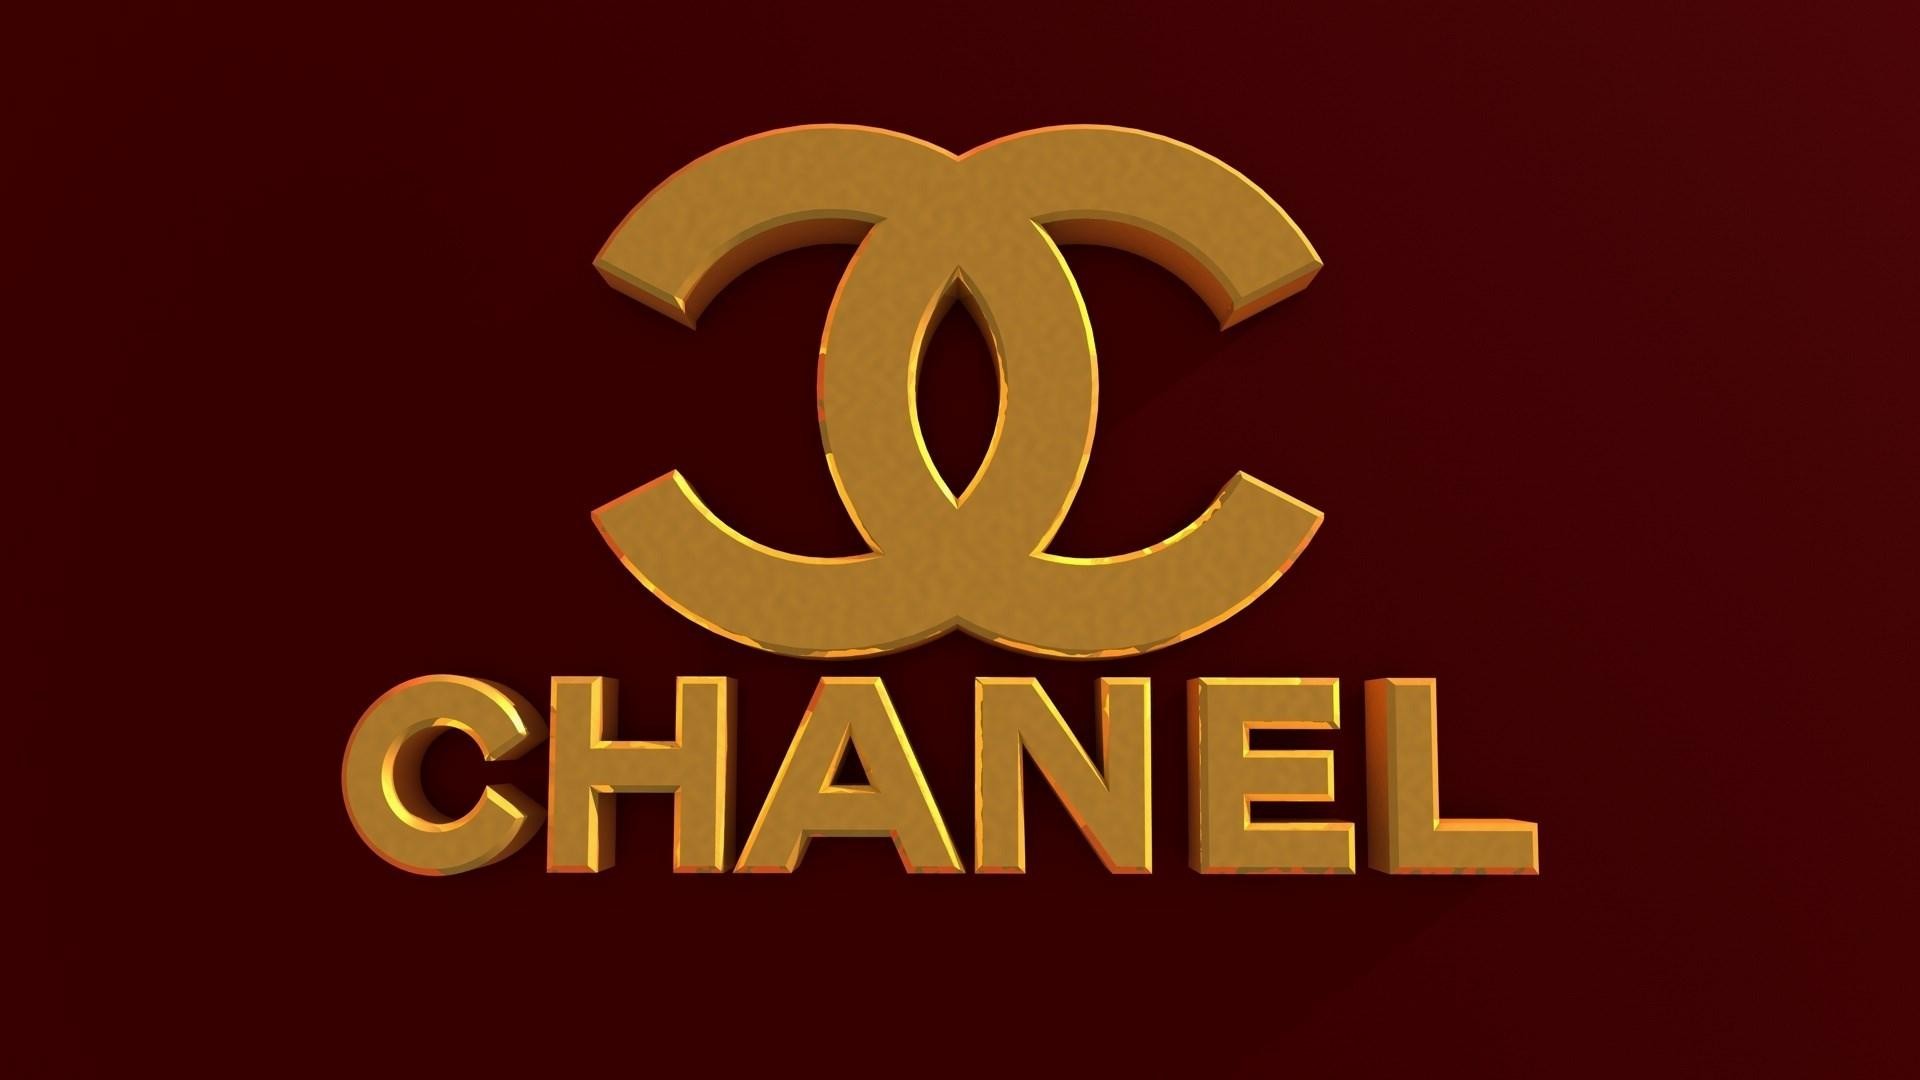 Chanel Logo Tumblr wallpaper. Pink Chanel Wallpaper BestPictureZone. Most popular tags for this image include chanel, wallpaper, blue 19201080